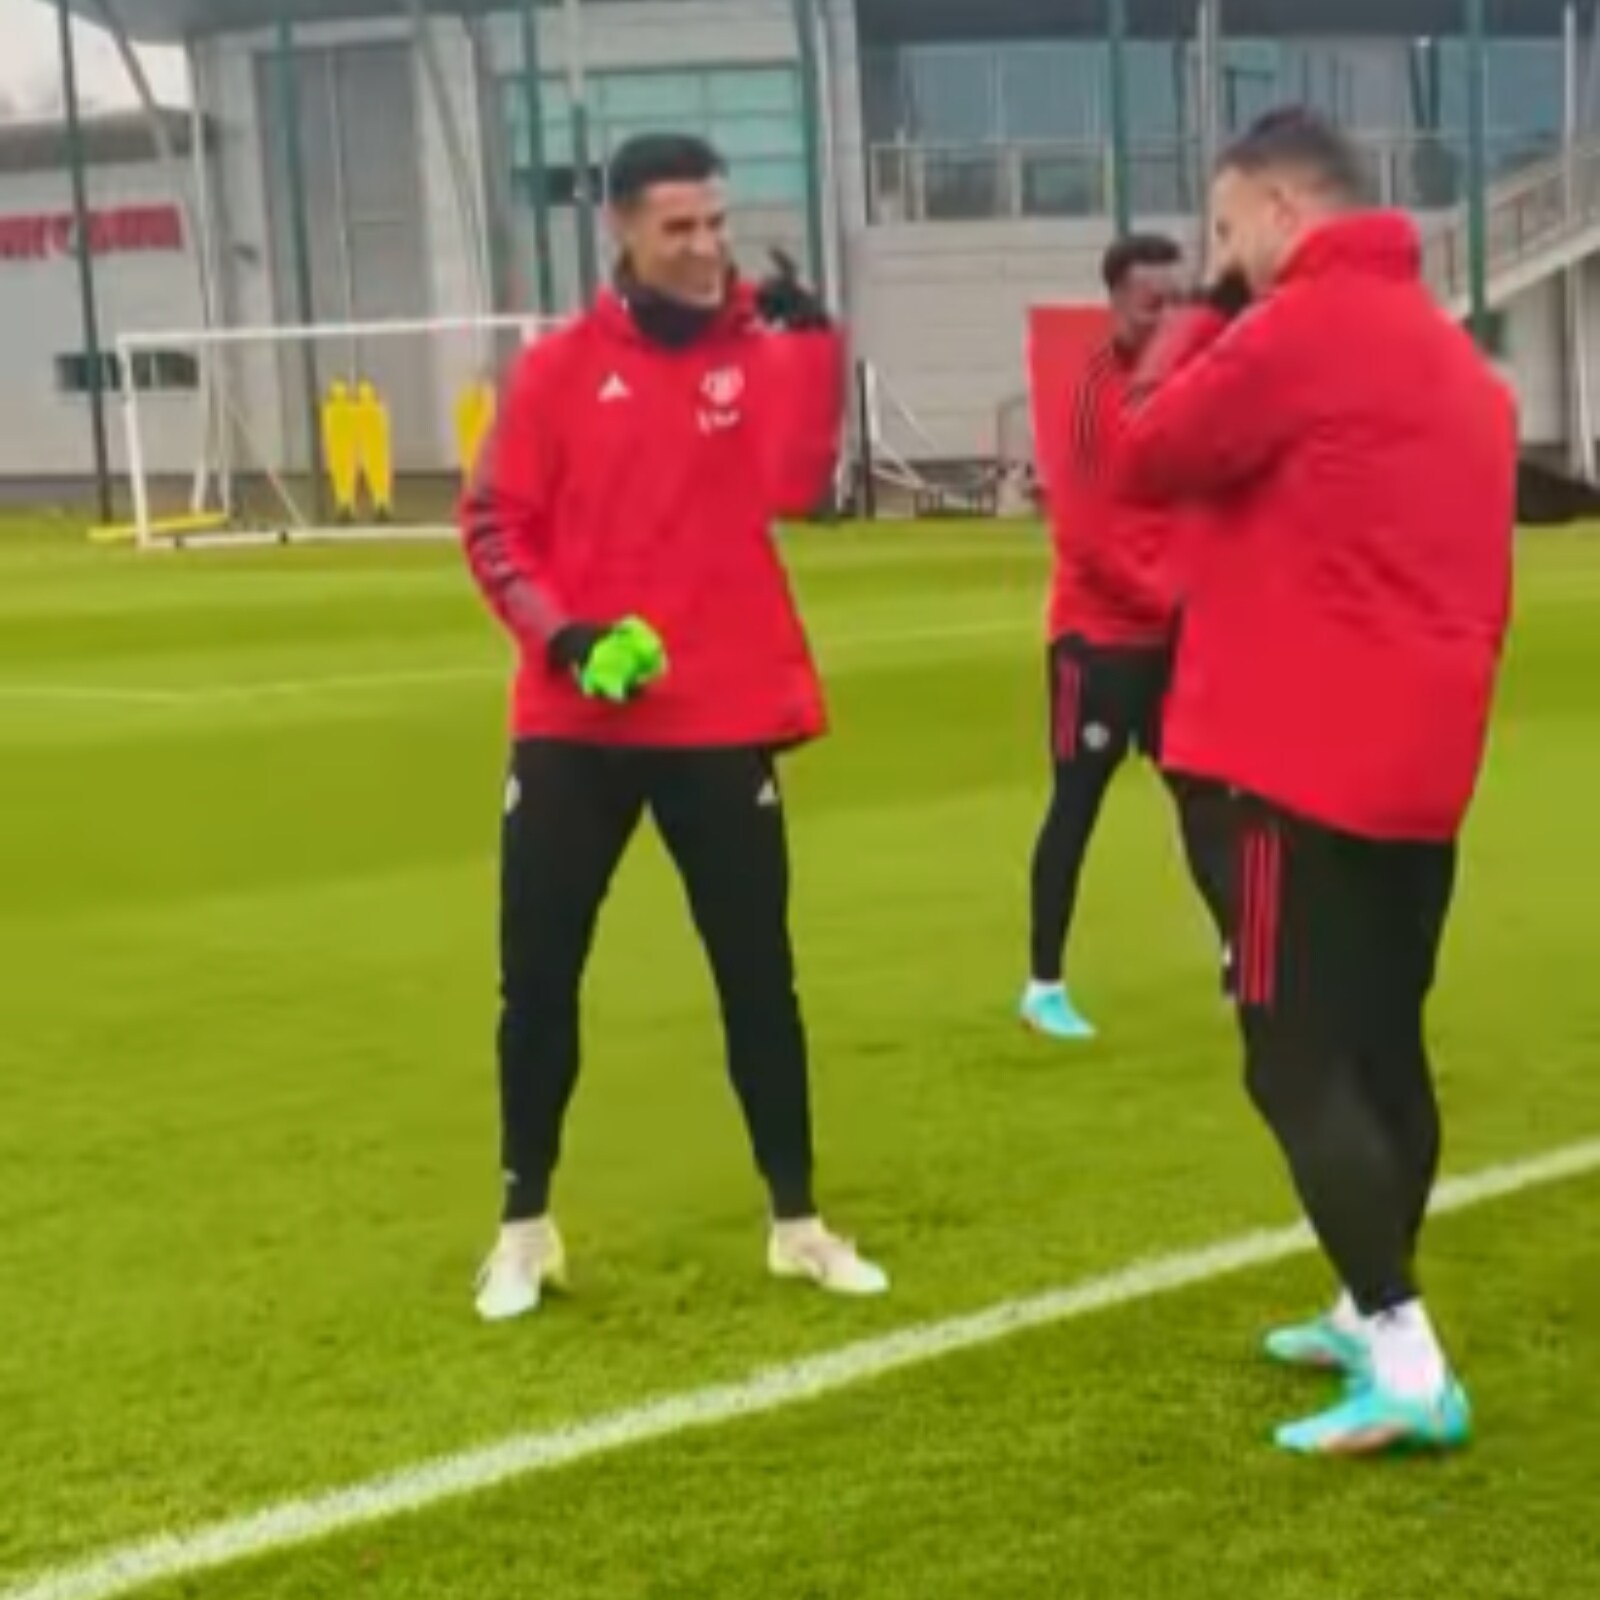 Cristiano Ronaldo 'Too Quick' for Dalot in Fun Game at Manchester United  Training | WATCH